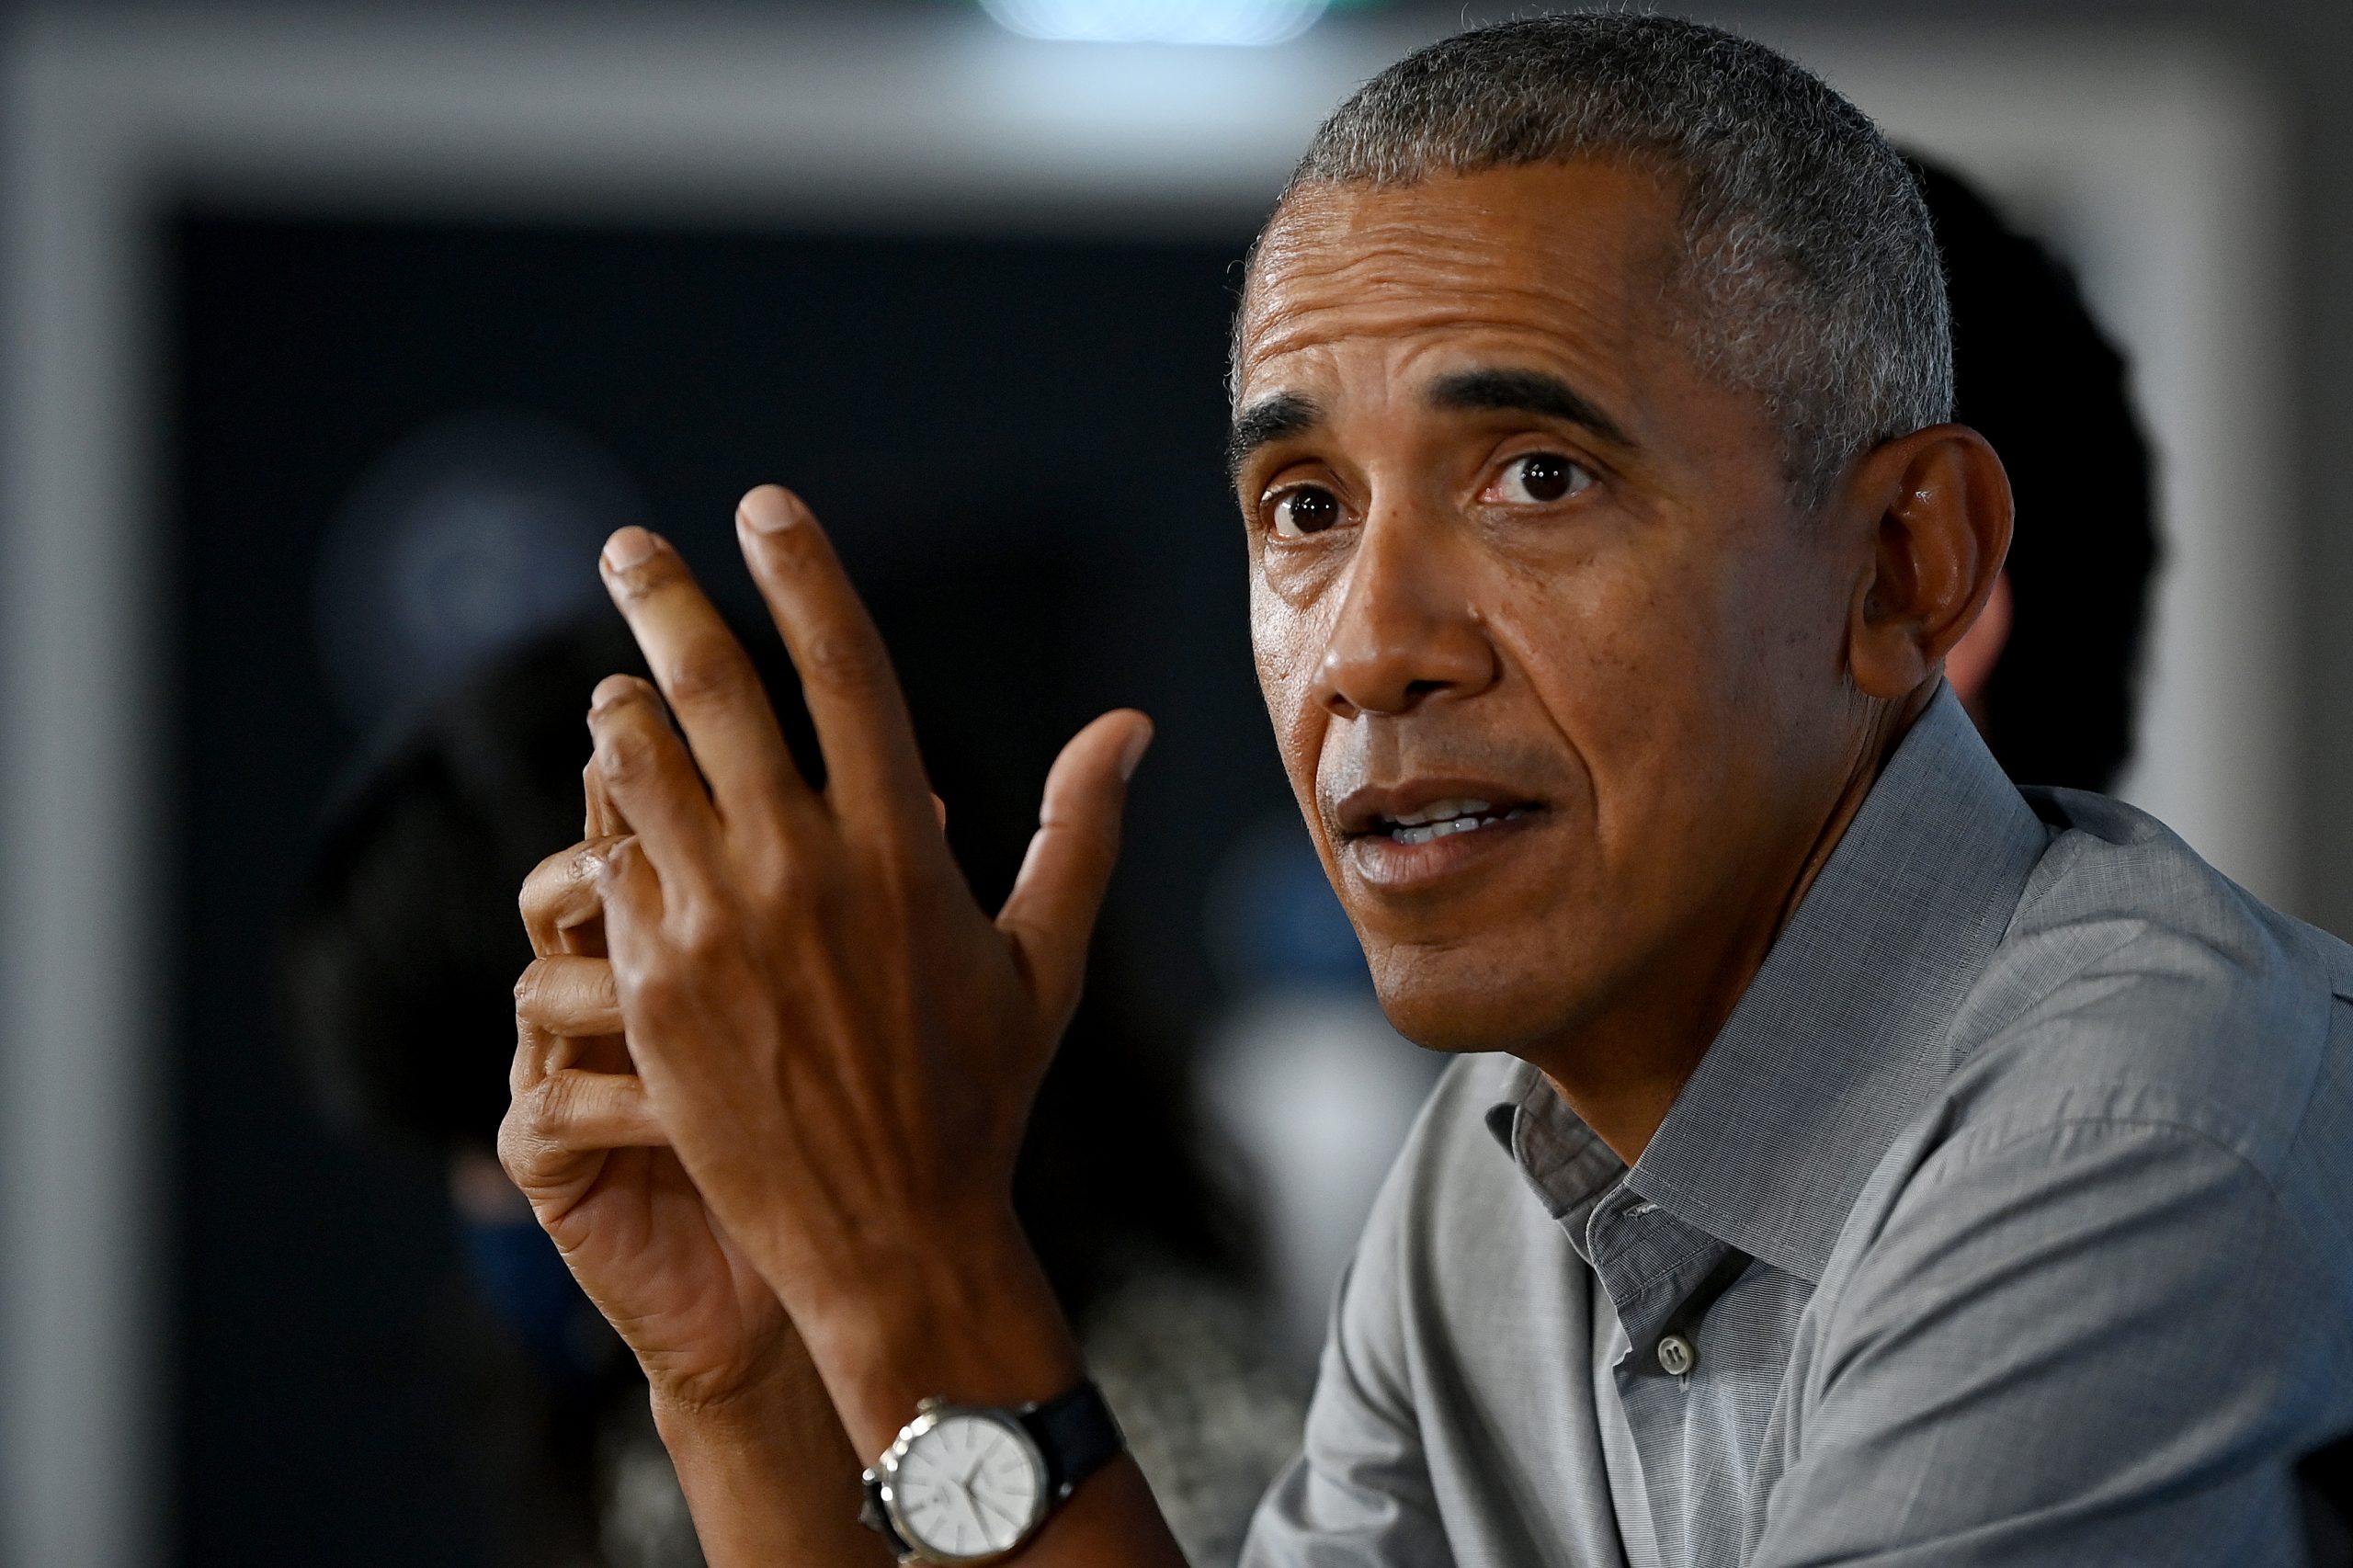 Obama to deliver warning of democracy’s peril against twin backdrops: Jan. 6 and Ukraine